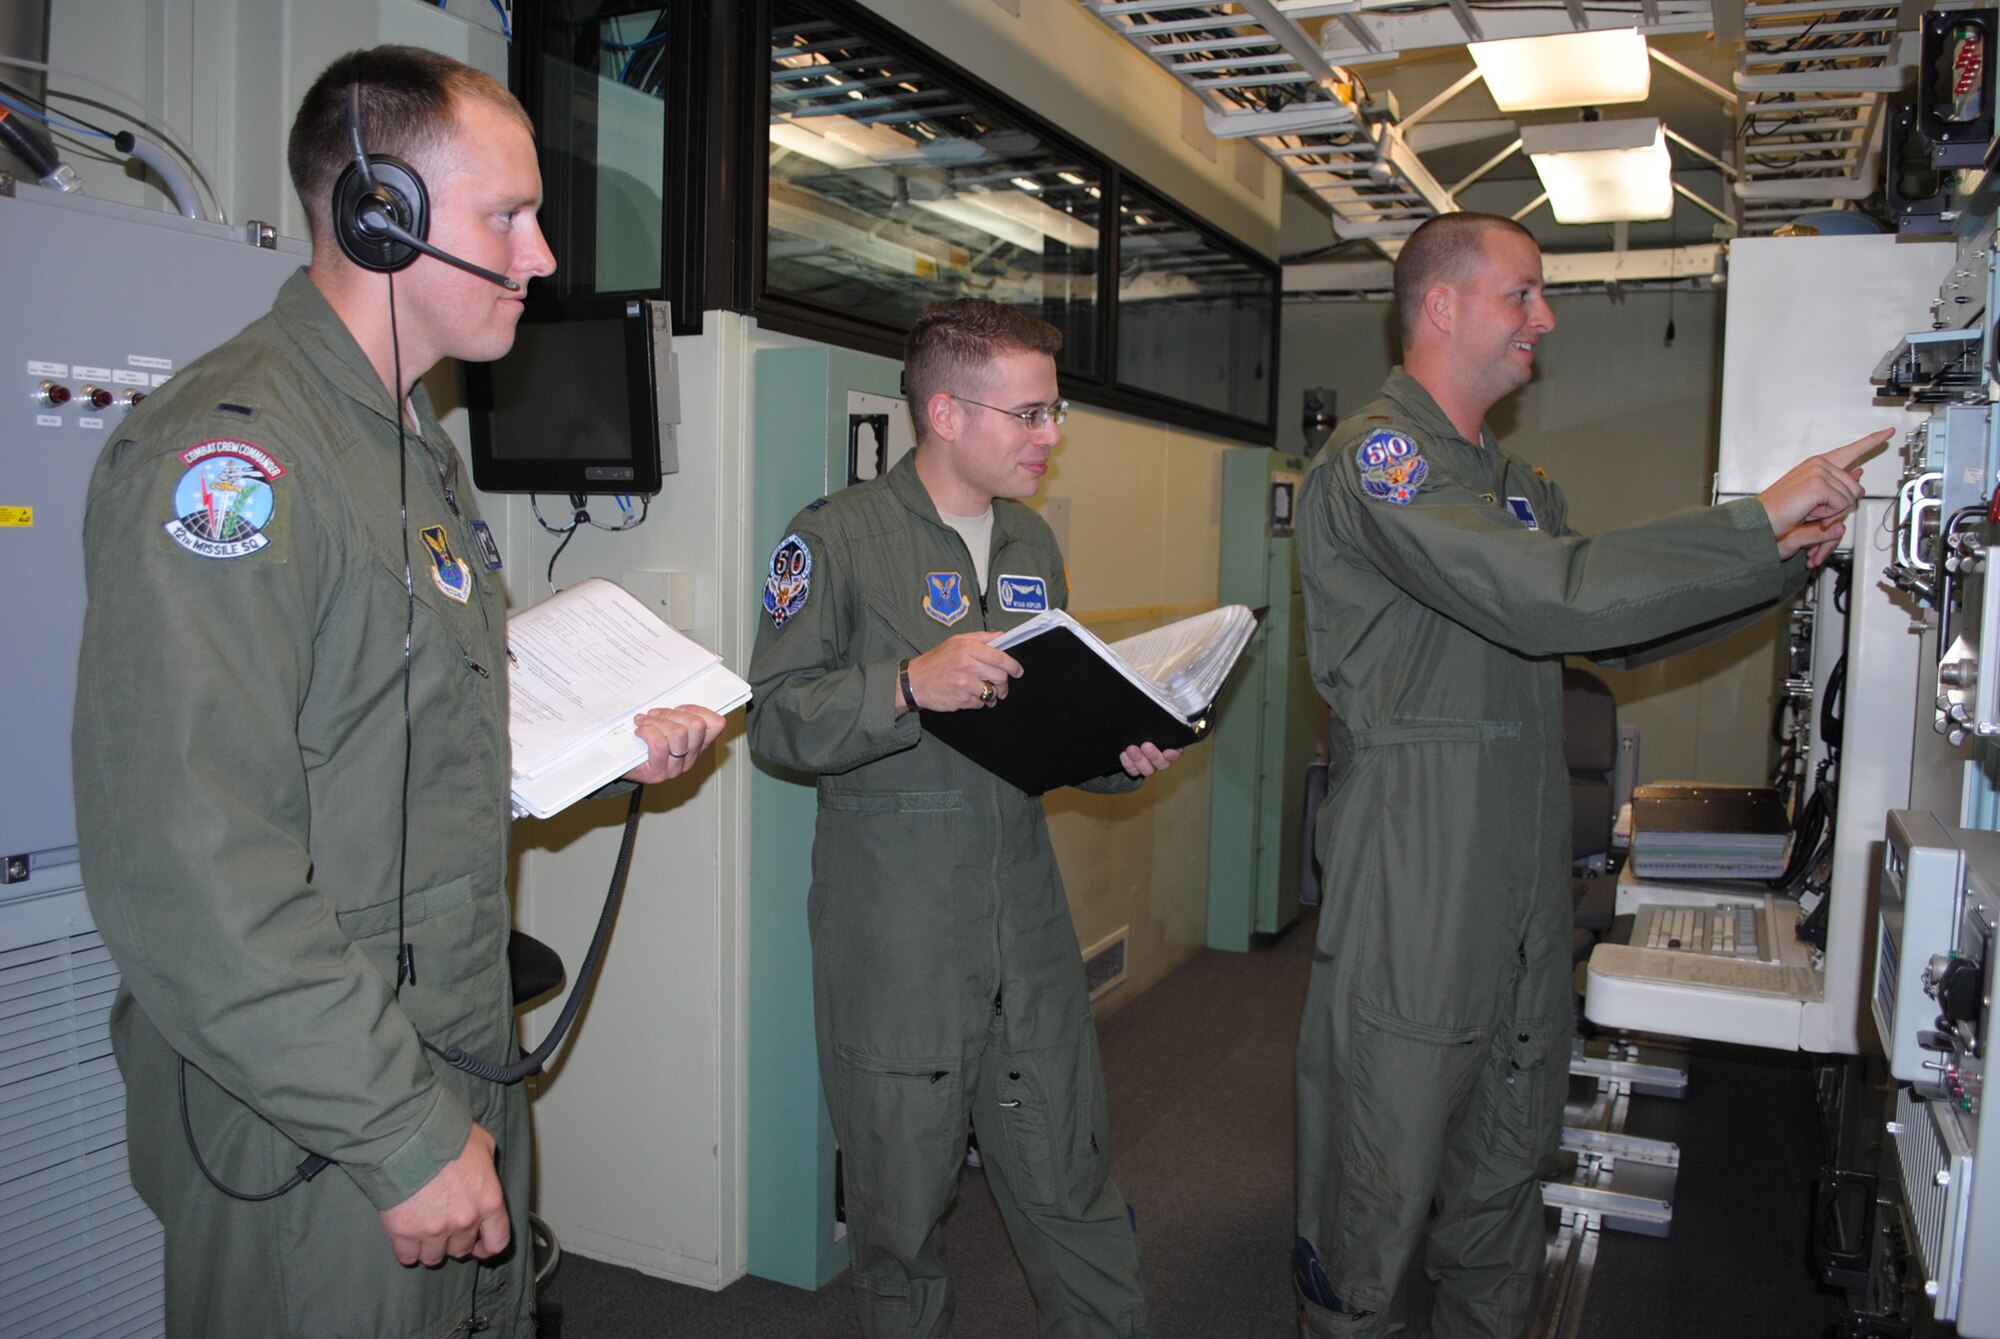 1st Lt. Daniel Hejde, 12th Missile Squadron ICBM combat crew commander, far left, watches as Capt. Ryan Hepler, 10th MS ICBM instructor combat crew commander, center, and 2nd Lt. Bryce Acres, deputy missile combat crew commander, complete a checklist during a simulated scenario in the MPT on Aug. 17. Hepler and Acres were chosen to represent the 10th Missile Squadron in the upcoming Global Strike Challenge.  Hejde is one of two trainers for the operations portion of the Global Strike Challenge. (U.S. Air Force photo/Airman 1st Class Katrina Heikkinen)